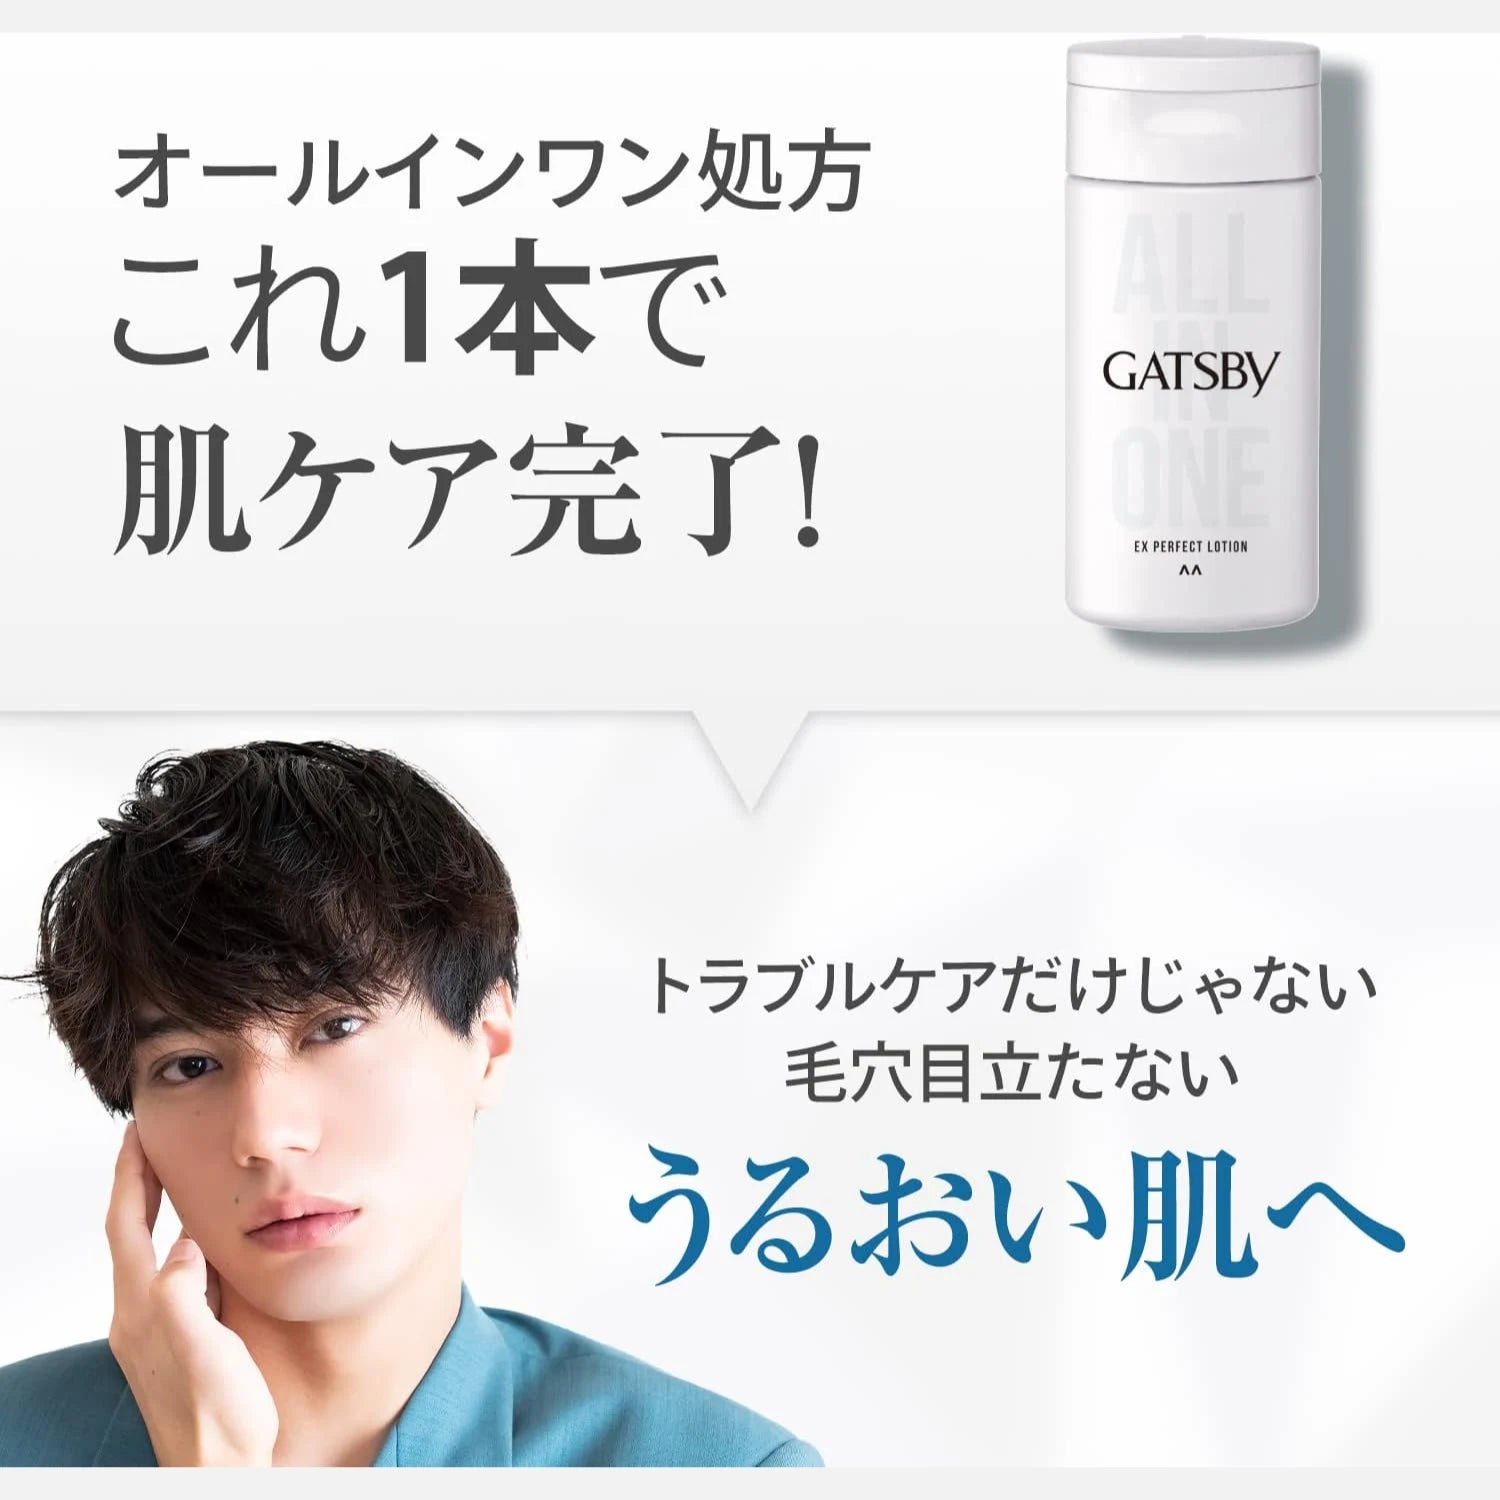 Gatsby All In One EX Perfect Lotion For Men 150ml - Buy Me Japan